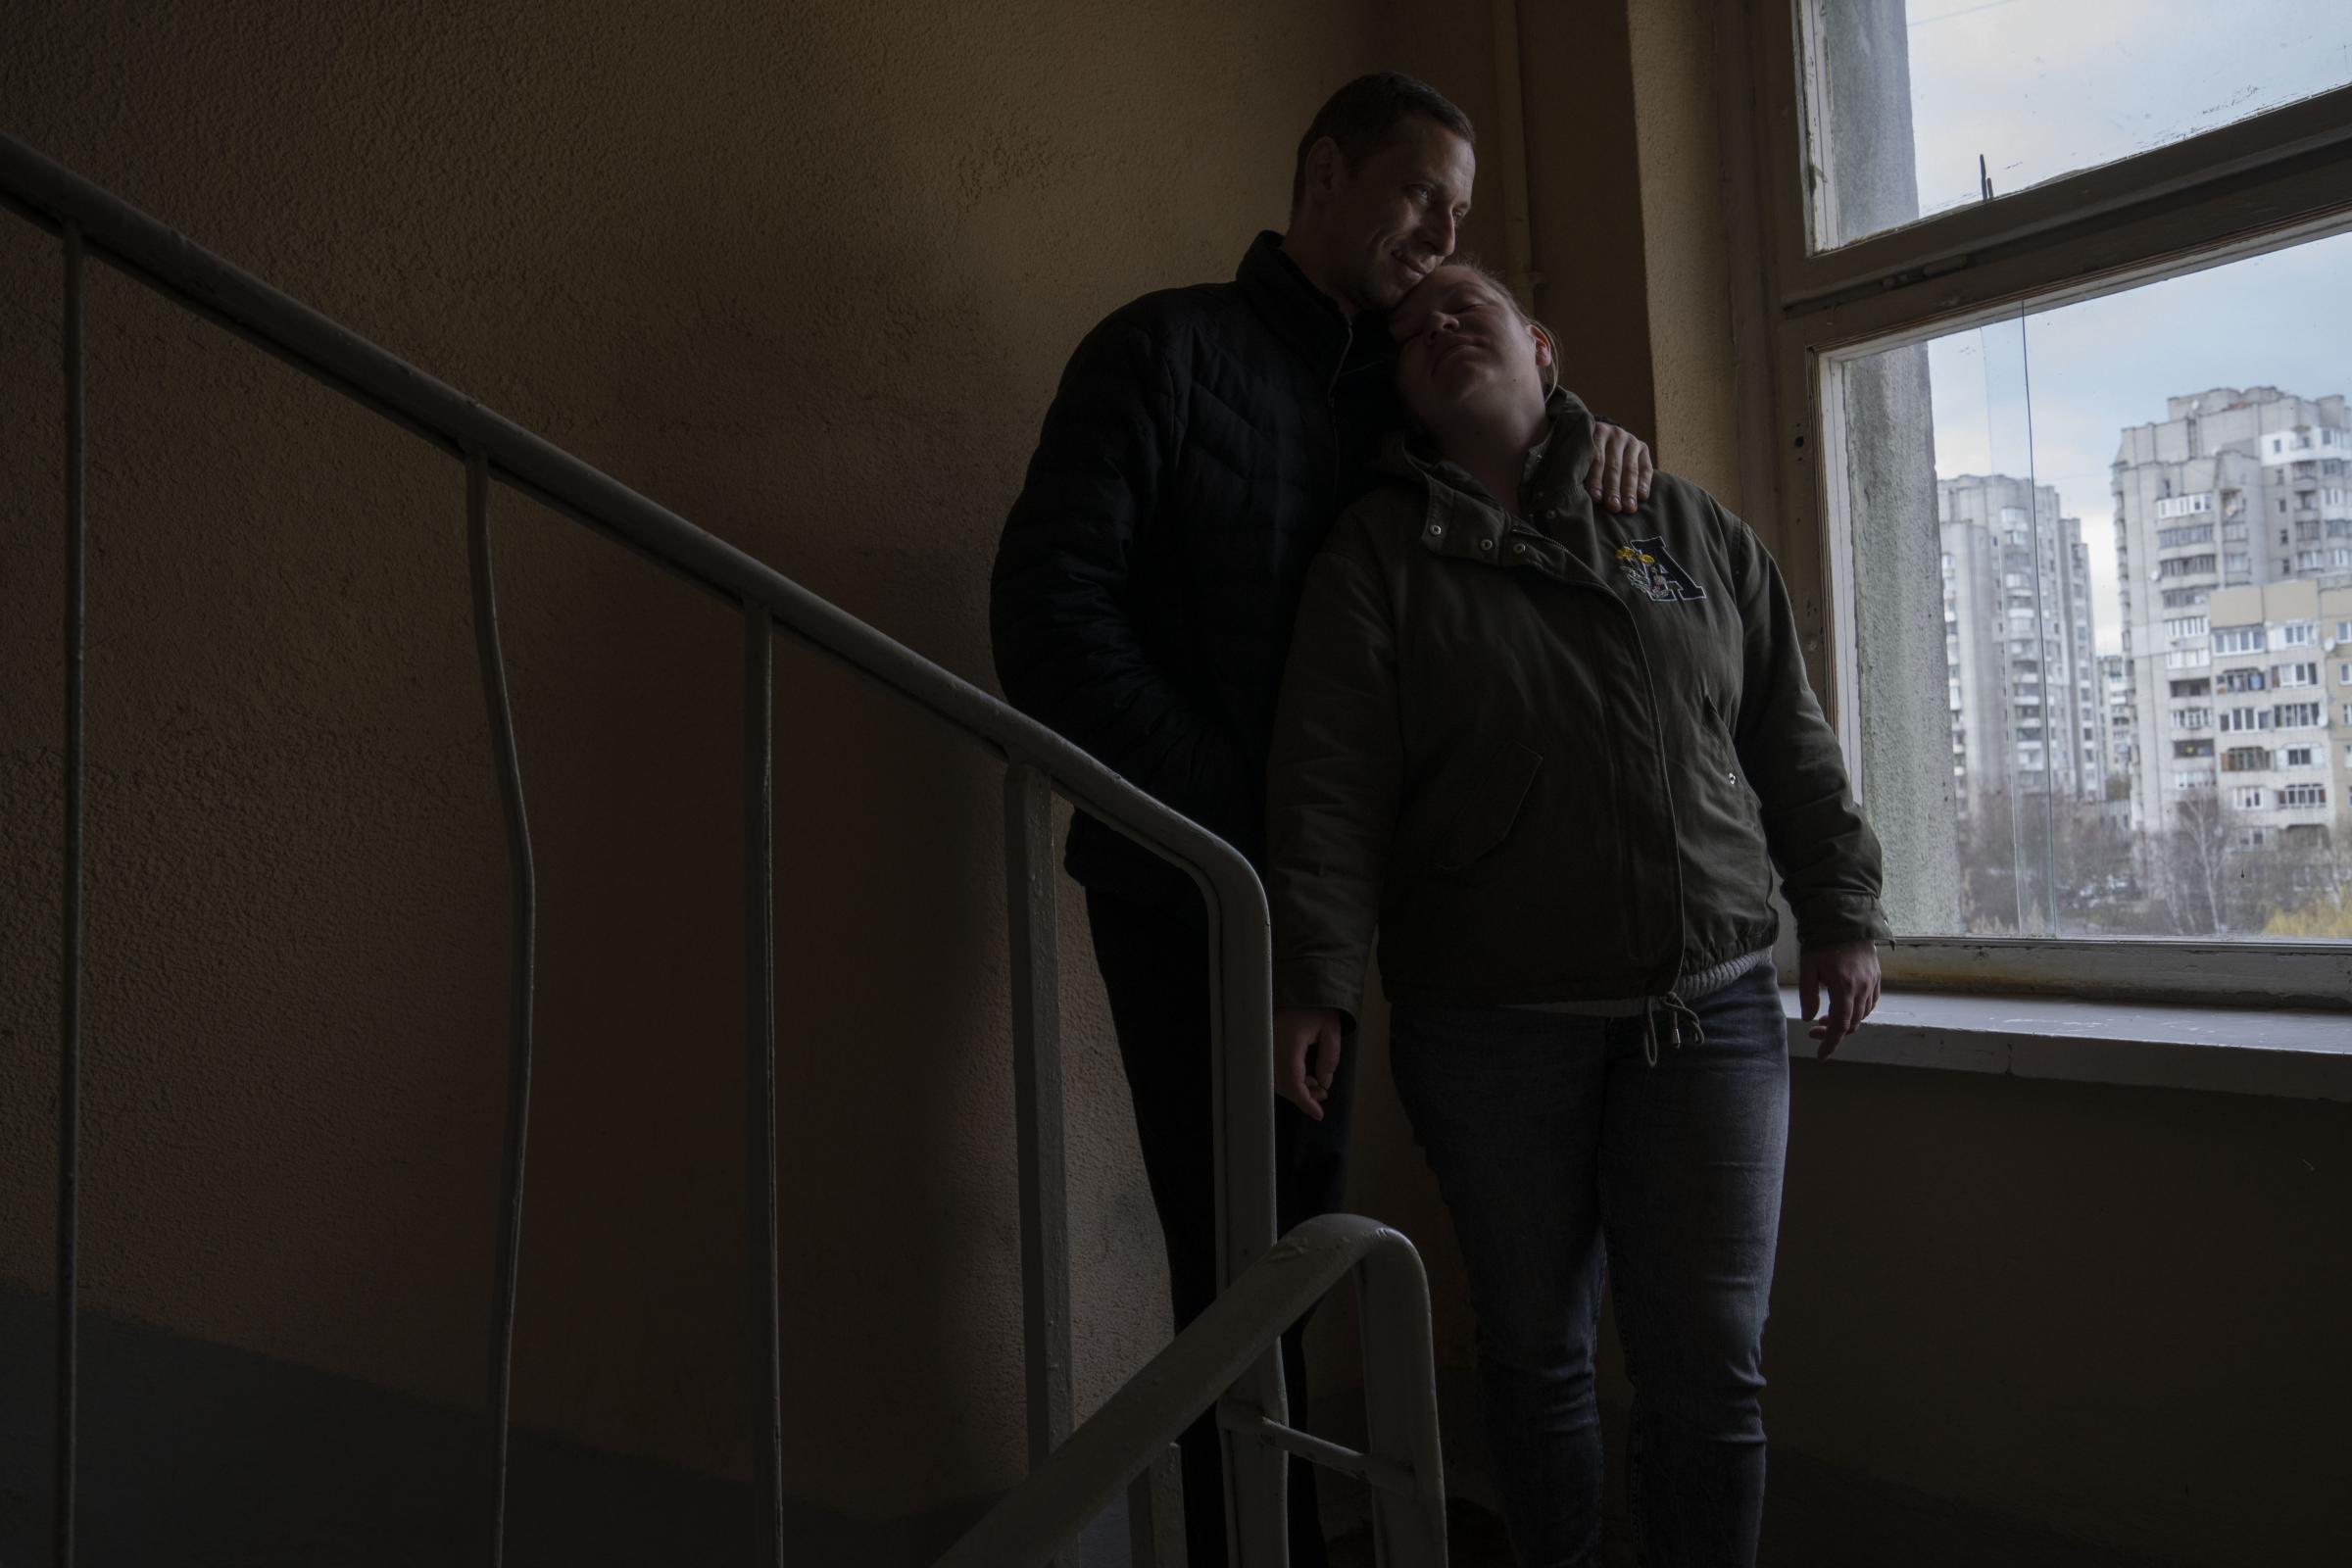 Iryna and Volodymyr, internally displaced from Irpin, lean on each other, on the stairwell near an apartment they took refuge in with four other adults from Irpin, in Lviv. Iryna and her husband Volodymyr were trapped for days between Ukrainian and Russian forces and quickly learned to distinguish between incoming and outgoing fire. They took shelter in a basement and whenever the shelling eased, they climbed out to shout to their neighbors to see if they were still alive.